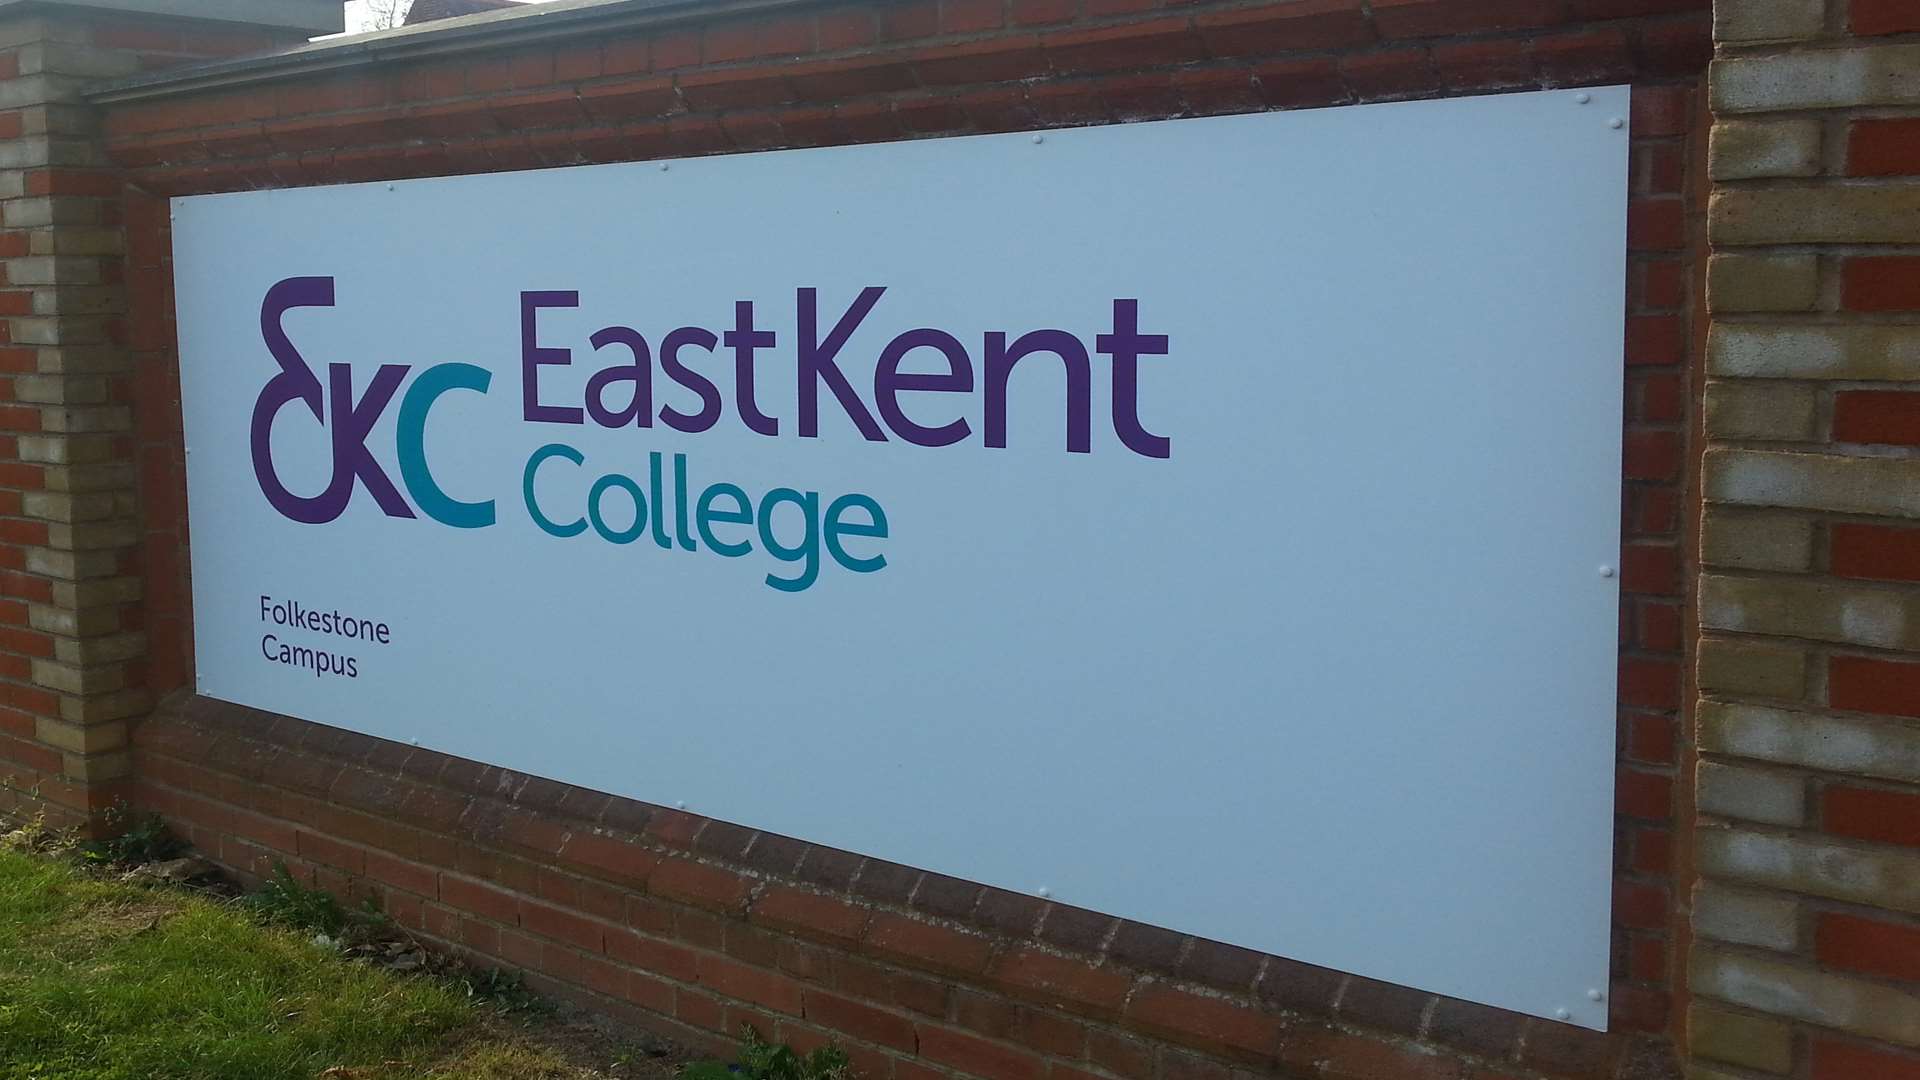 The newly-branded Folkestone campus of East Kent College